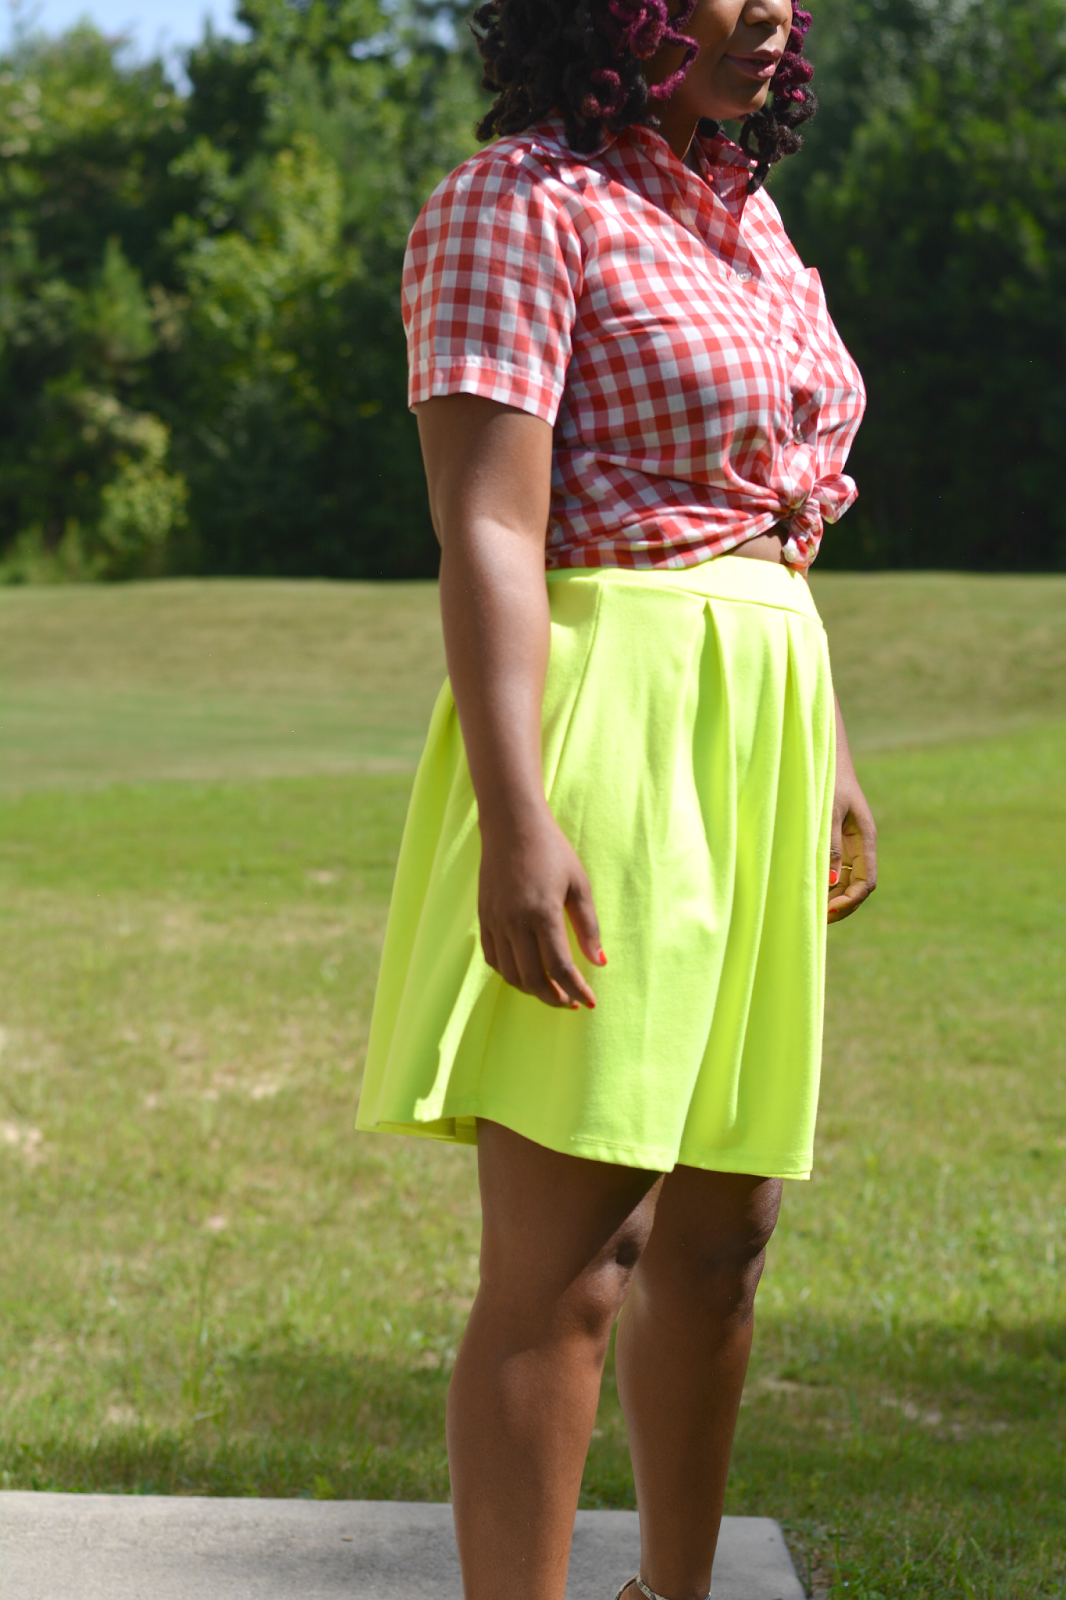 neon skirt worn with gingham